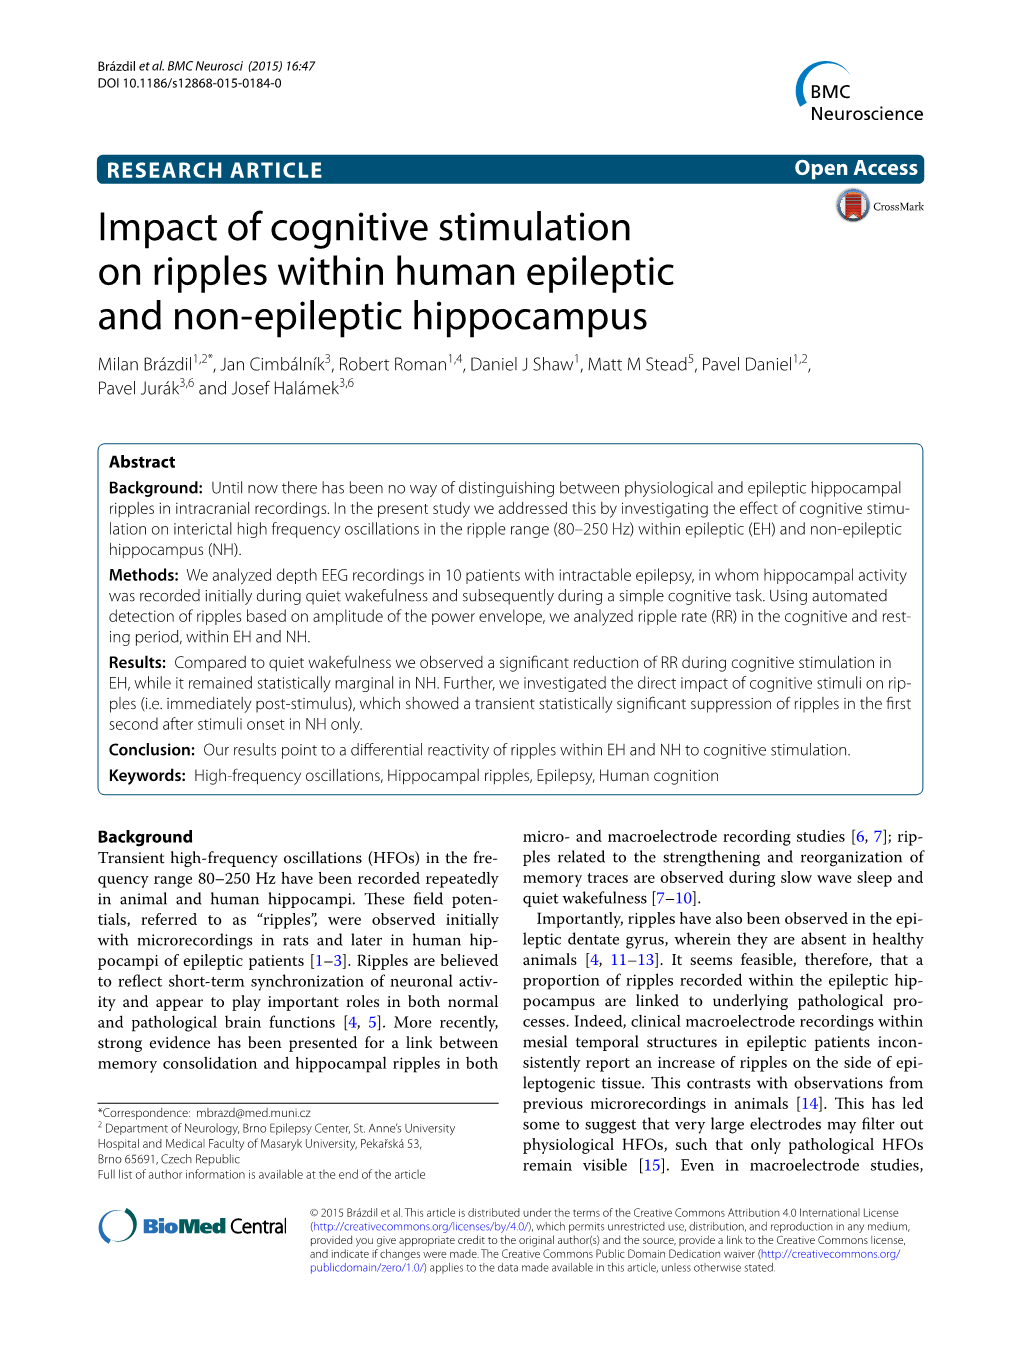 Impact of Cognitive Stimulation on Ripples Within Human Epileptic And